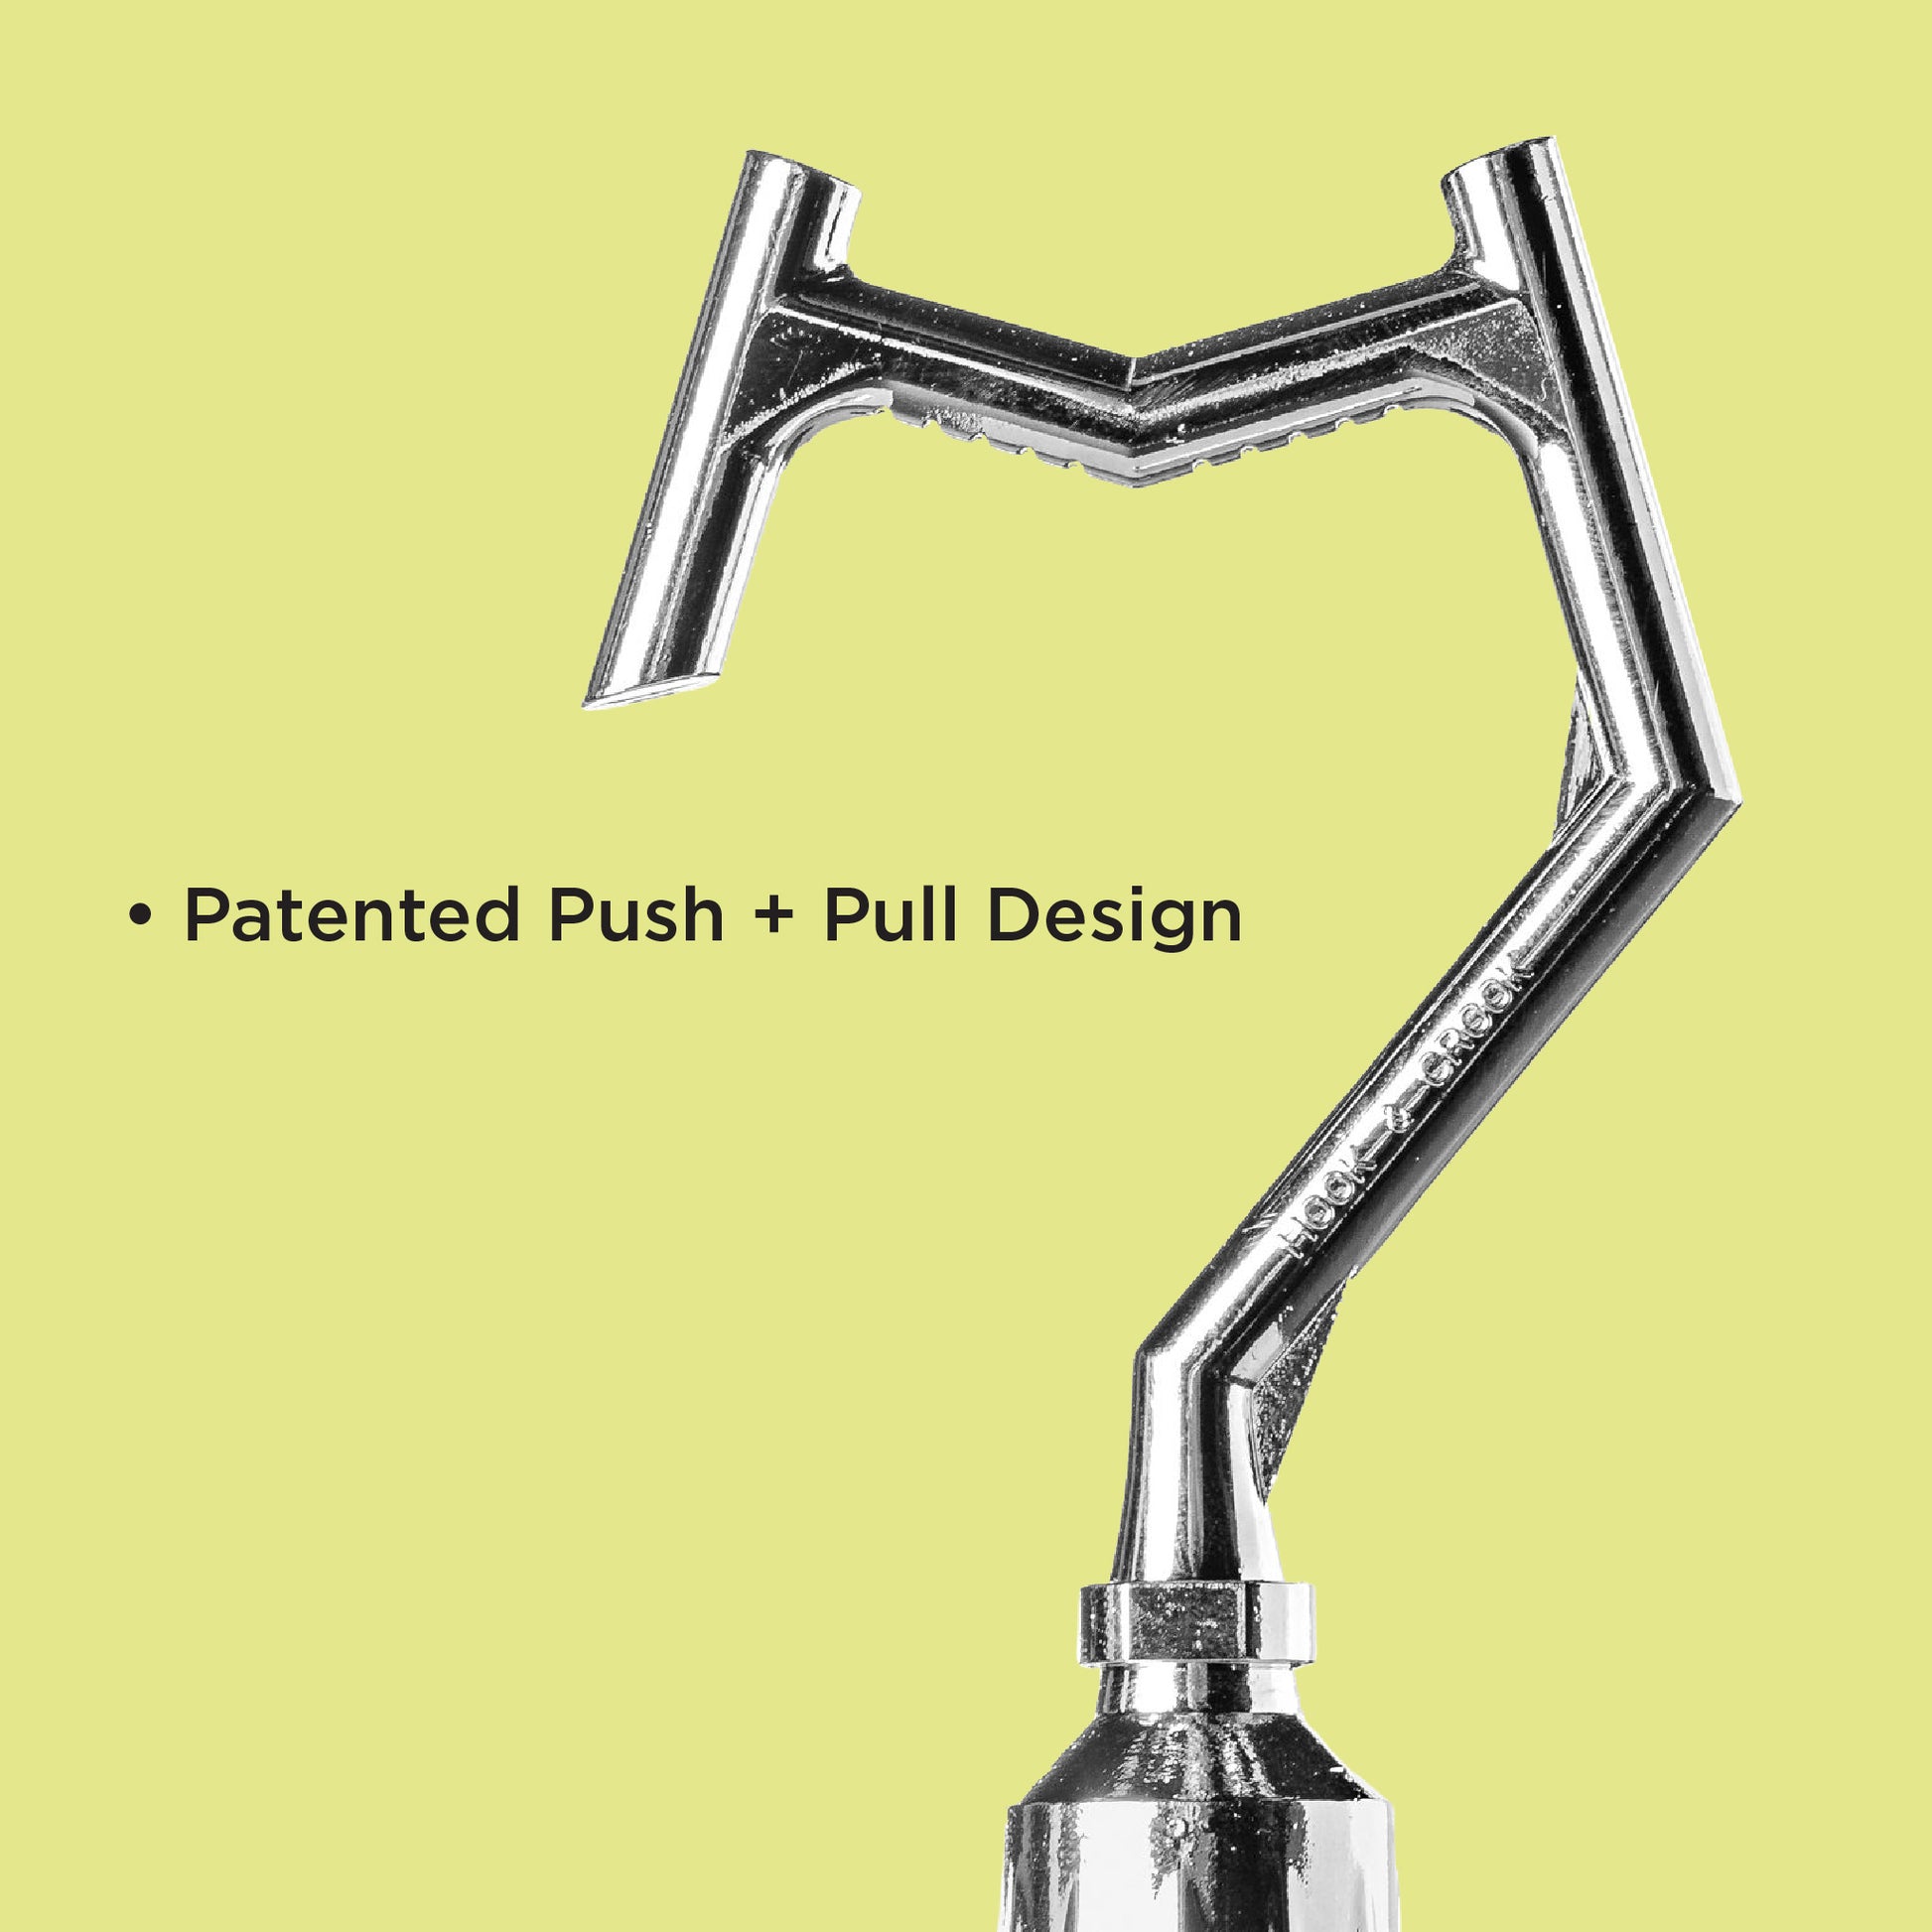 Big Reach Hook's Patented push and pull design 